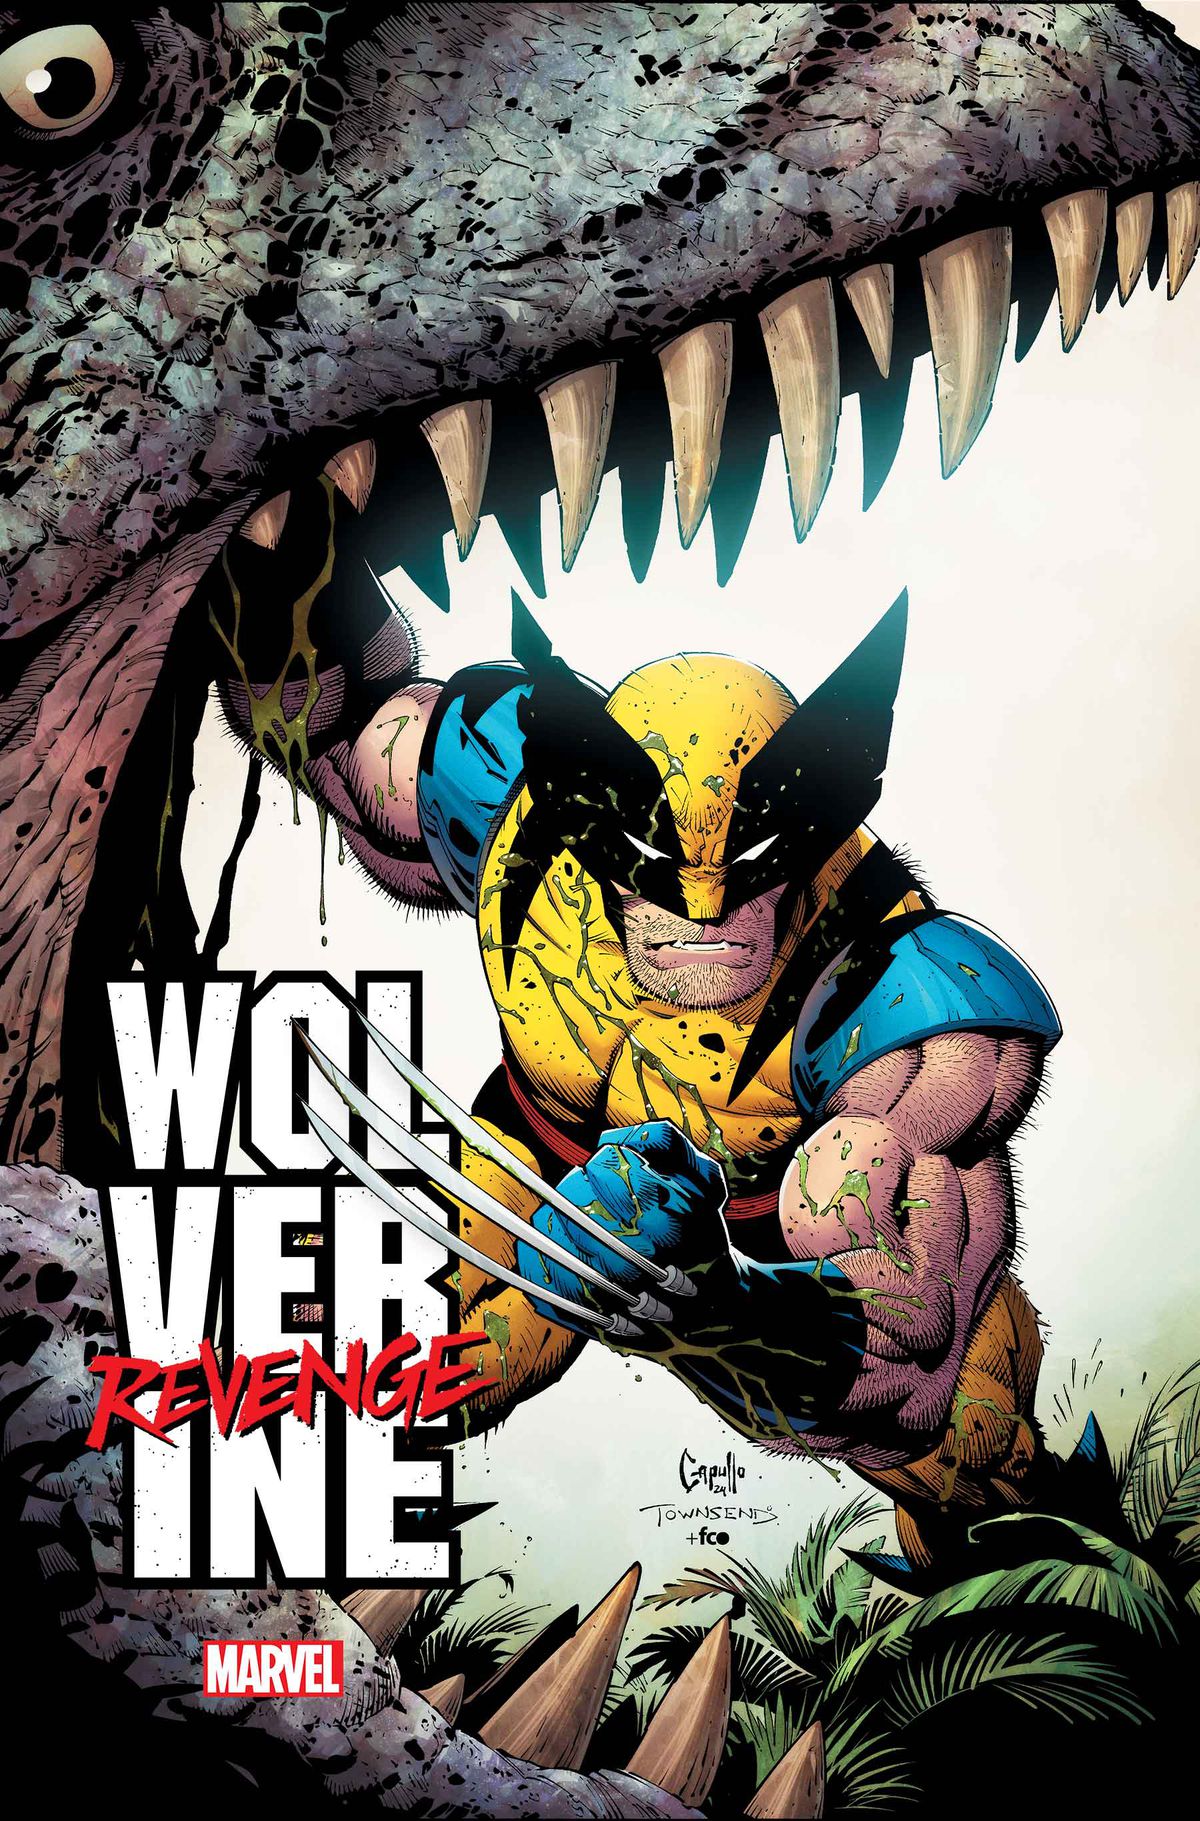 Wolverine brandishes a claw on the cover of Wolverine: Revenge #1. He’s standing in the jaws of what looks like a tyrannosaurus, holding it’s mouth open with his other hand.